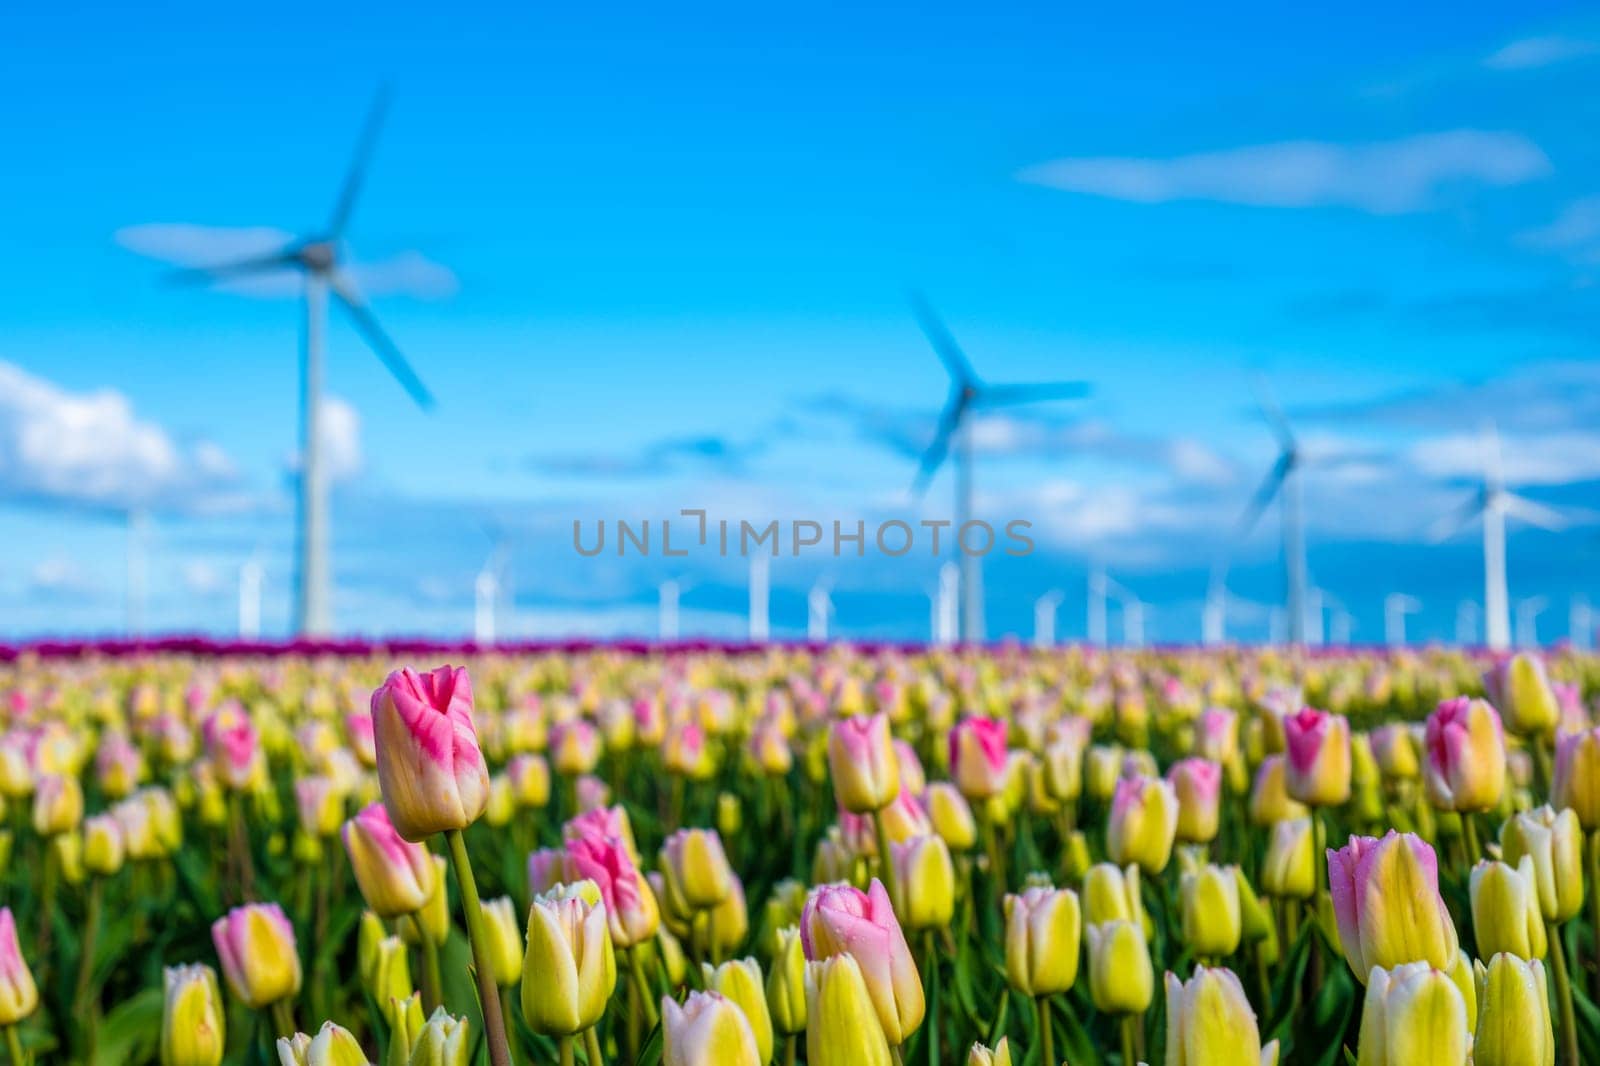 Vibrant tulips dance in a field while windmills stand tall in the background, capturing the essence of spring in the Netherlands by fokkebok